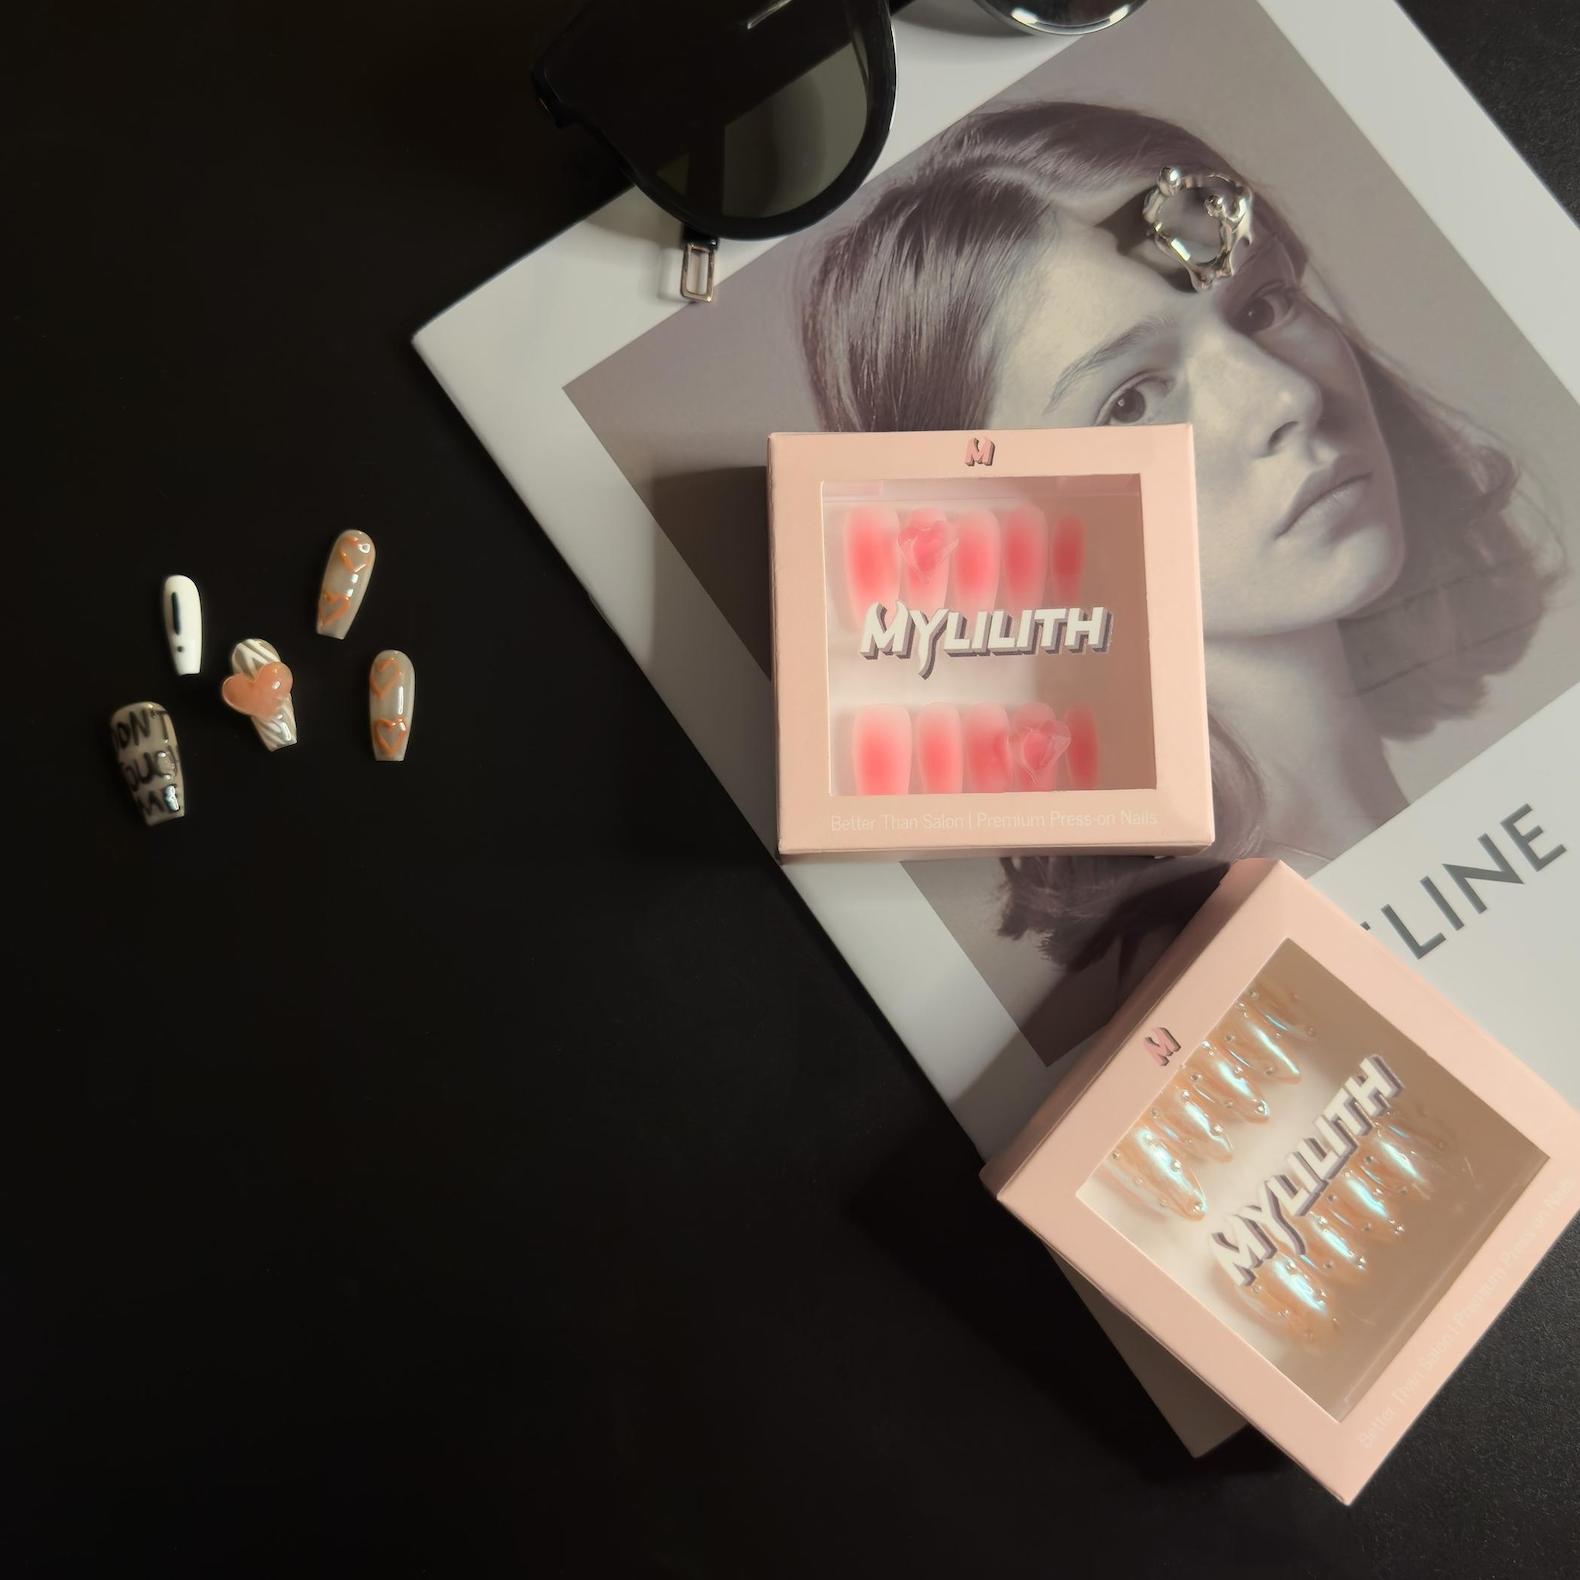 Two boxes of MyLilith press-on nails displayed on a dark surface alongside a fashion magazine, a pair of sunglasses, and several loose press-on nails.